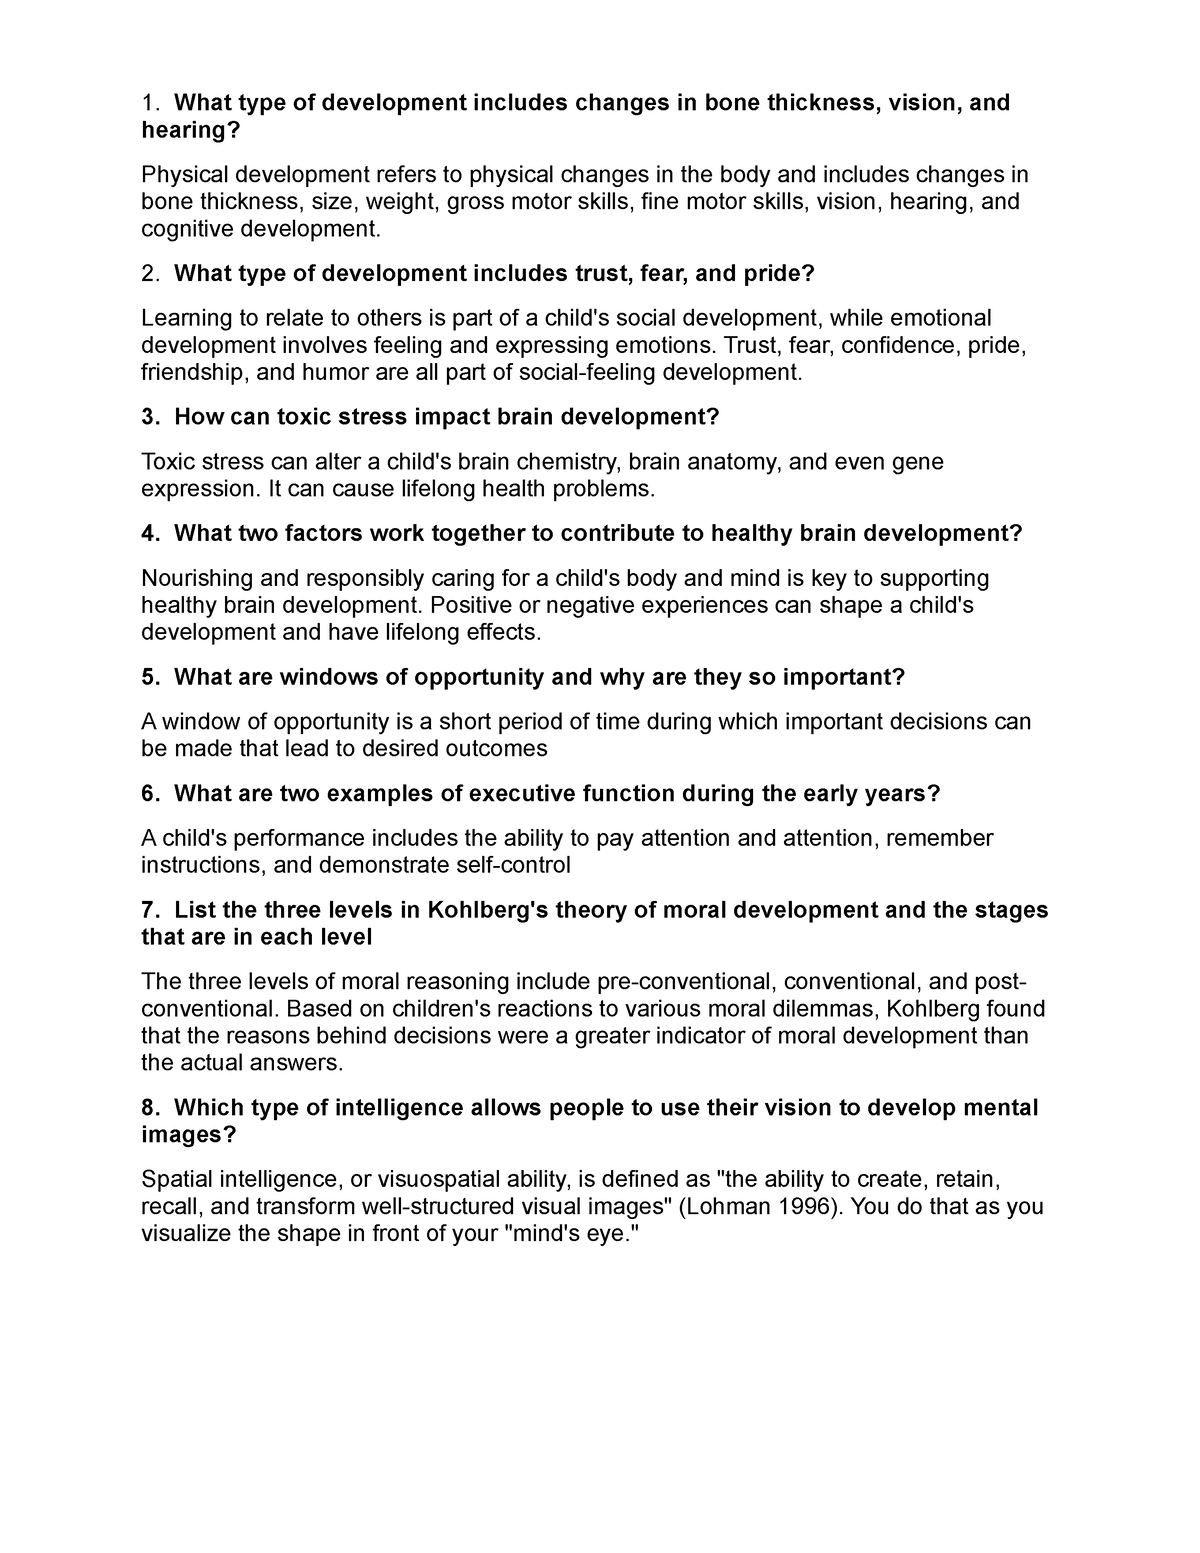 Review Questions - What type of development includes changes in bone ...